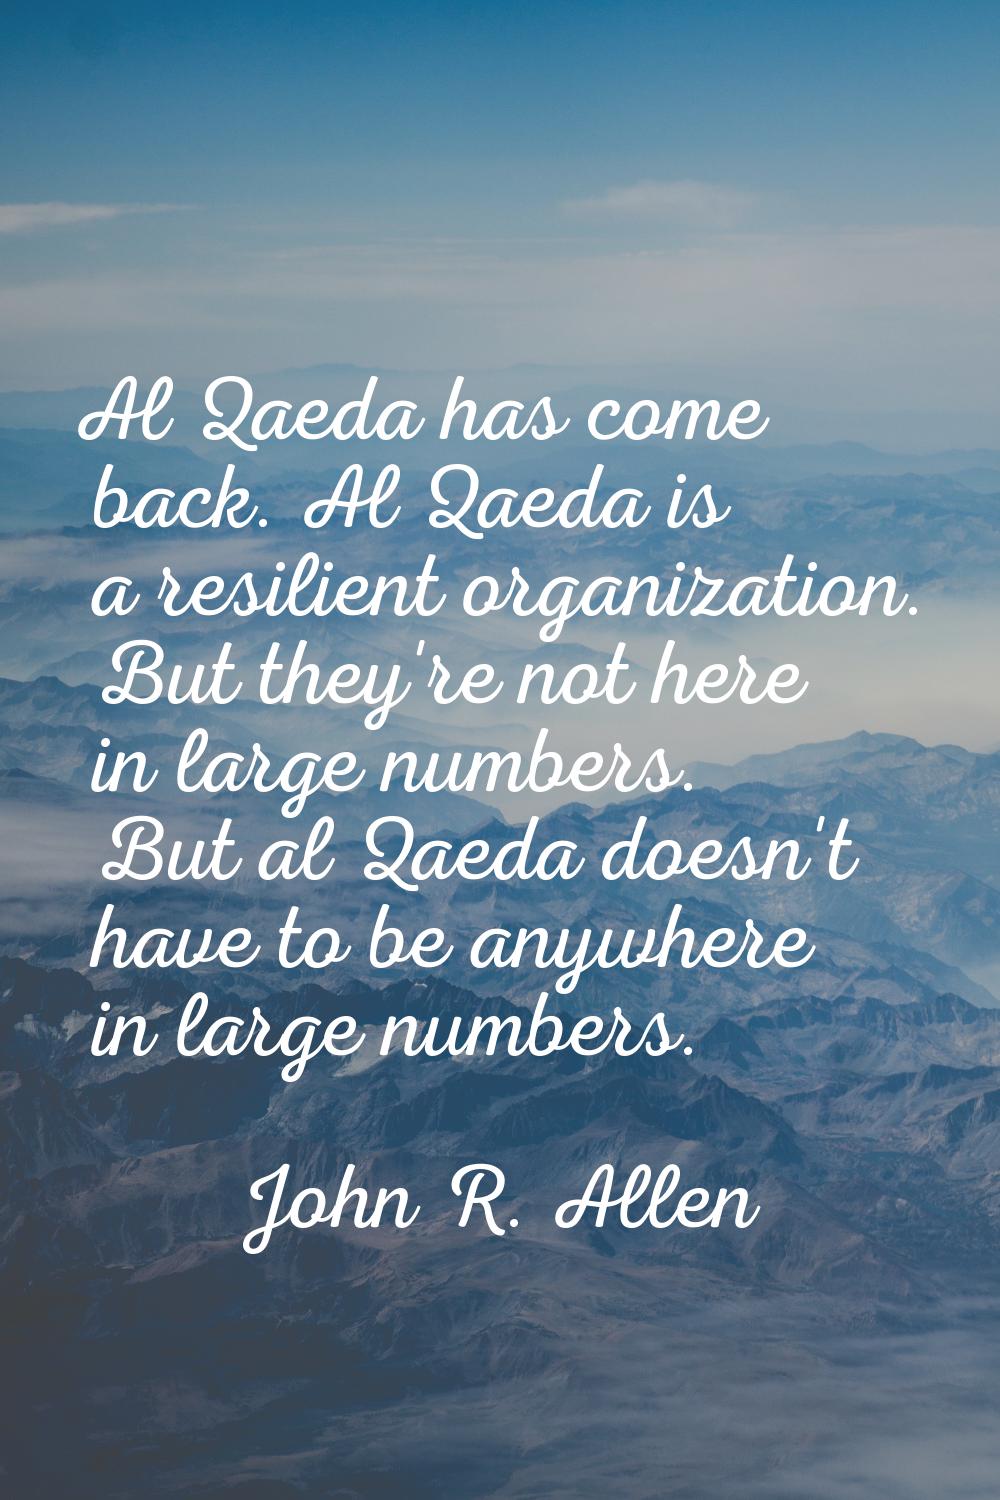 Al Qaeda has come back. Al Qaeda is a resilient organization. But they're not here in large numbers